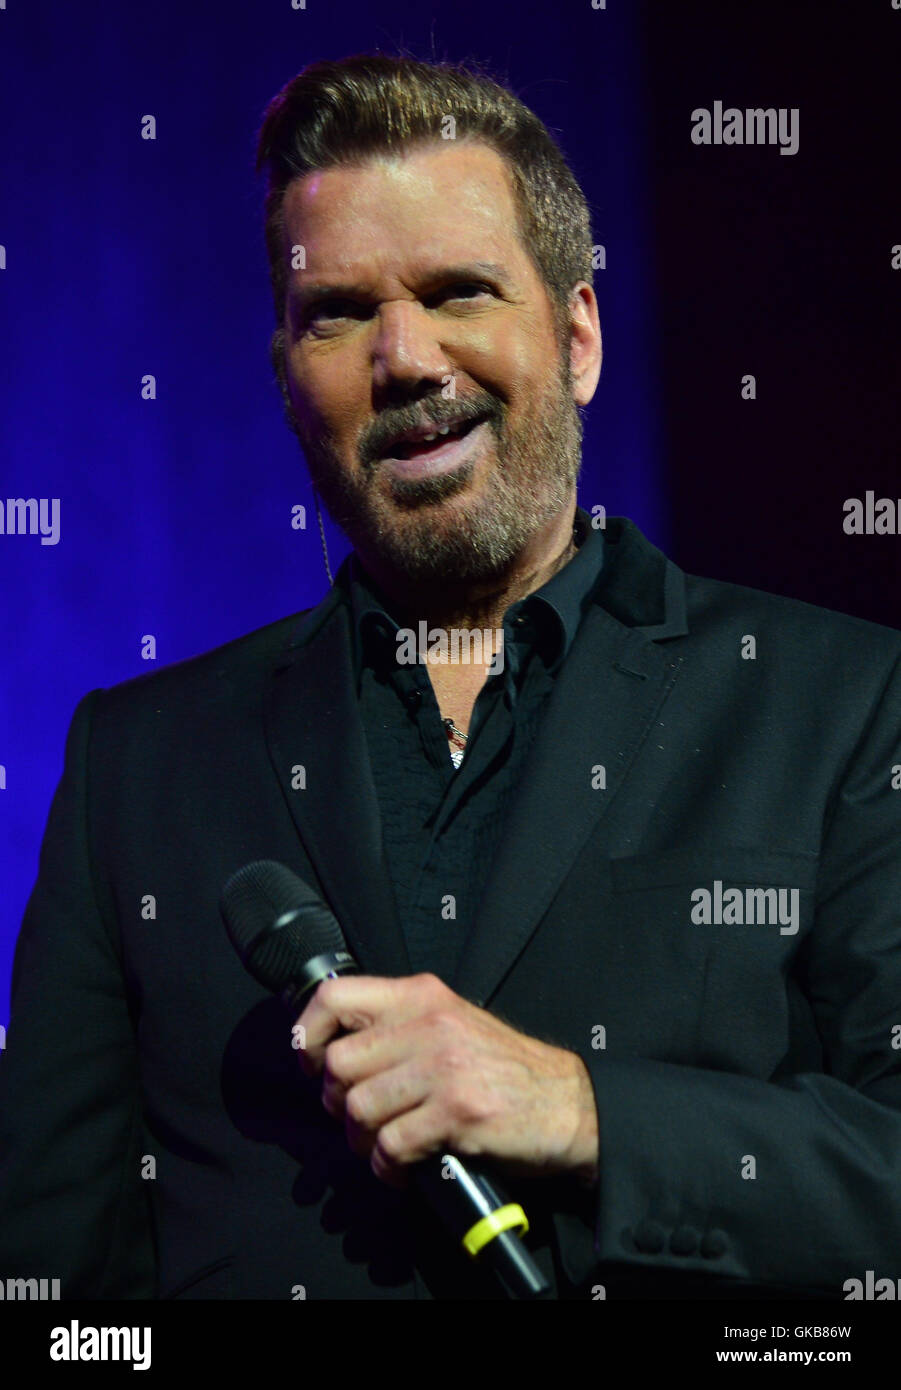 Aqui Estoy Benefit For Ecuador at BankUnited Center  Featuring: Willy Chirino Where: Coral Gables, Florida, United States When: 11 May 2016 Stock Photo